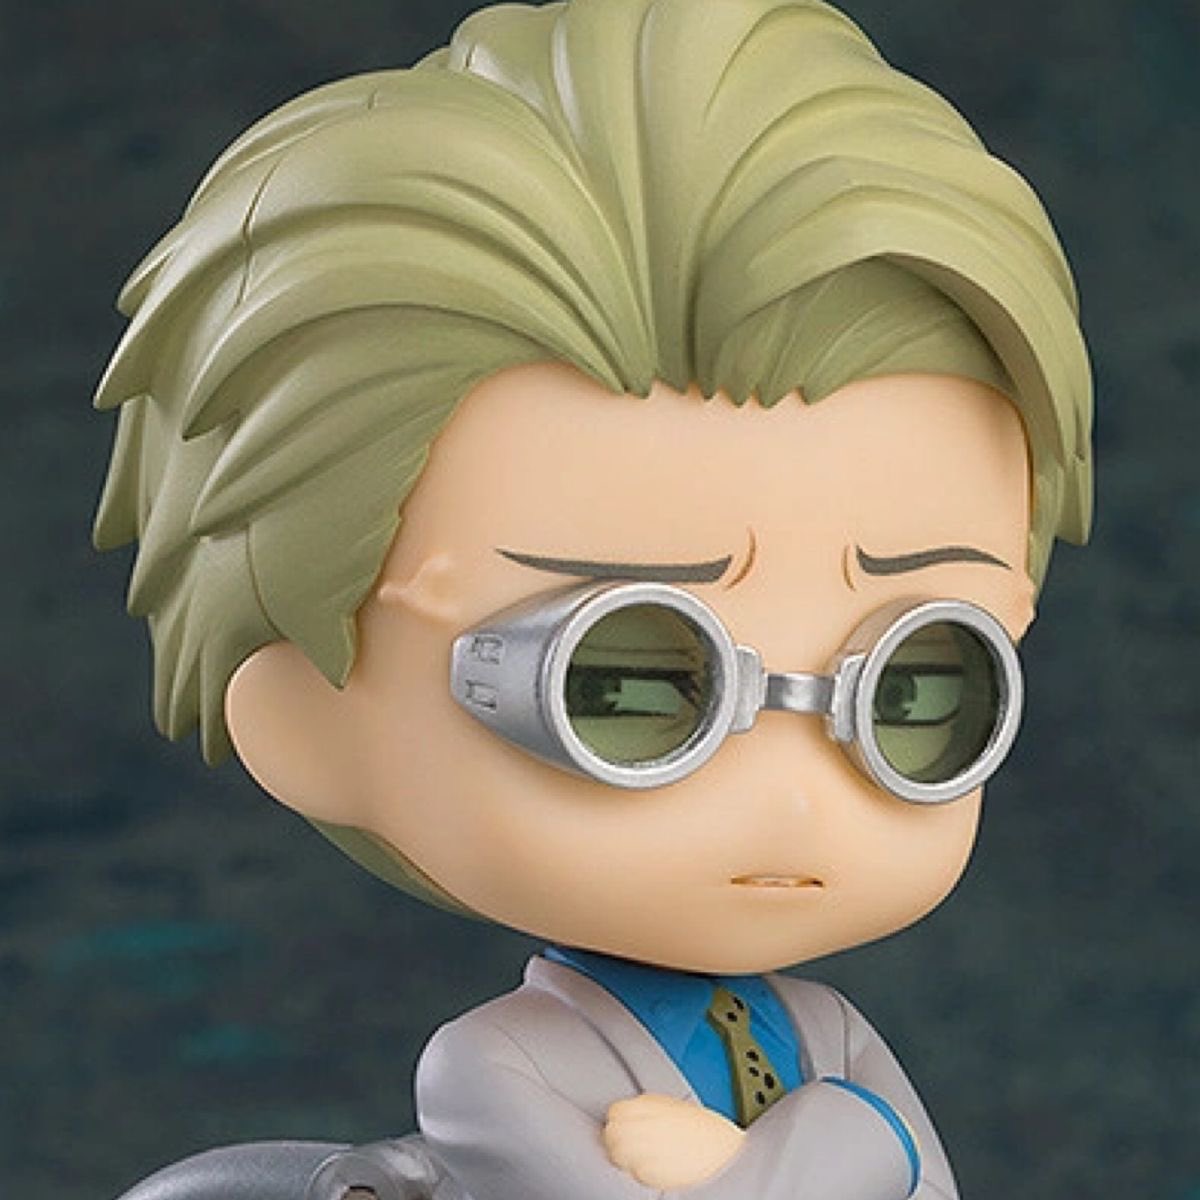 this nendo of nanami’s face plate though xD he’s judging real hard